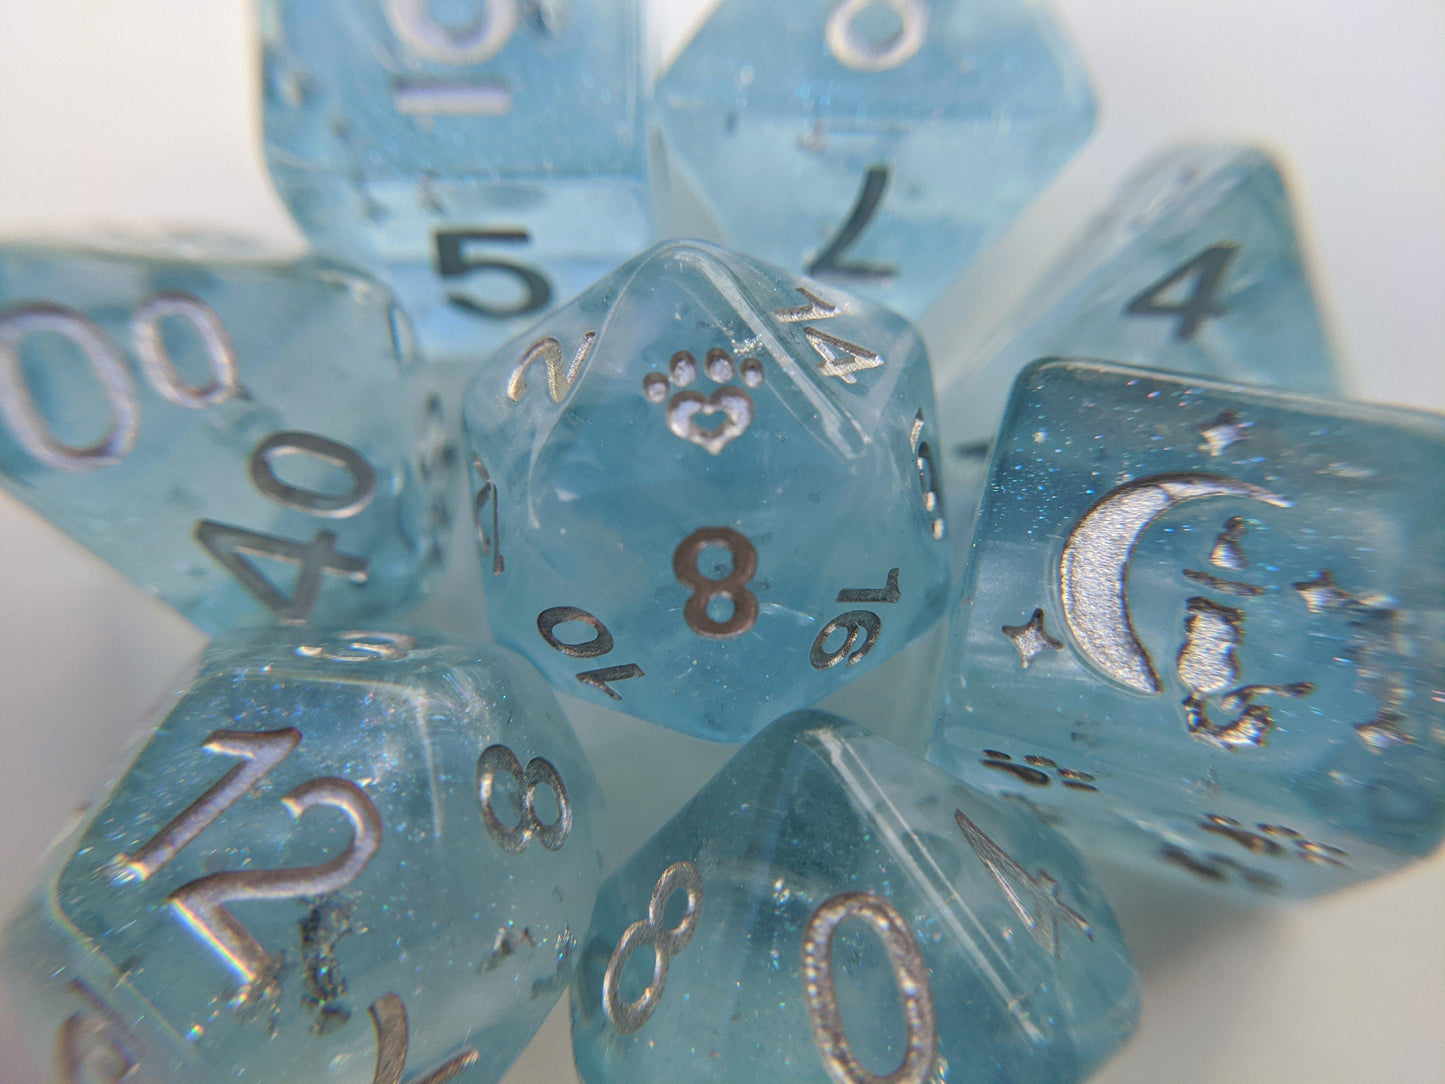 Crystal Clear Ice Dice for DnD Gaming Nights? Can You Make Clear